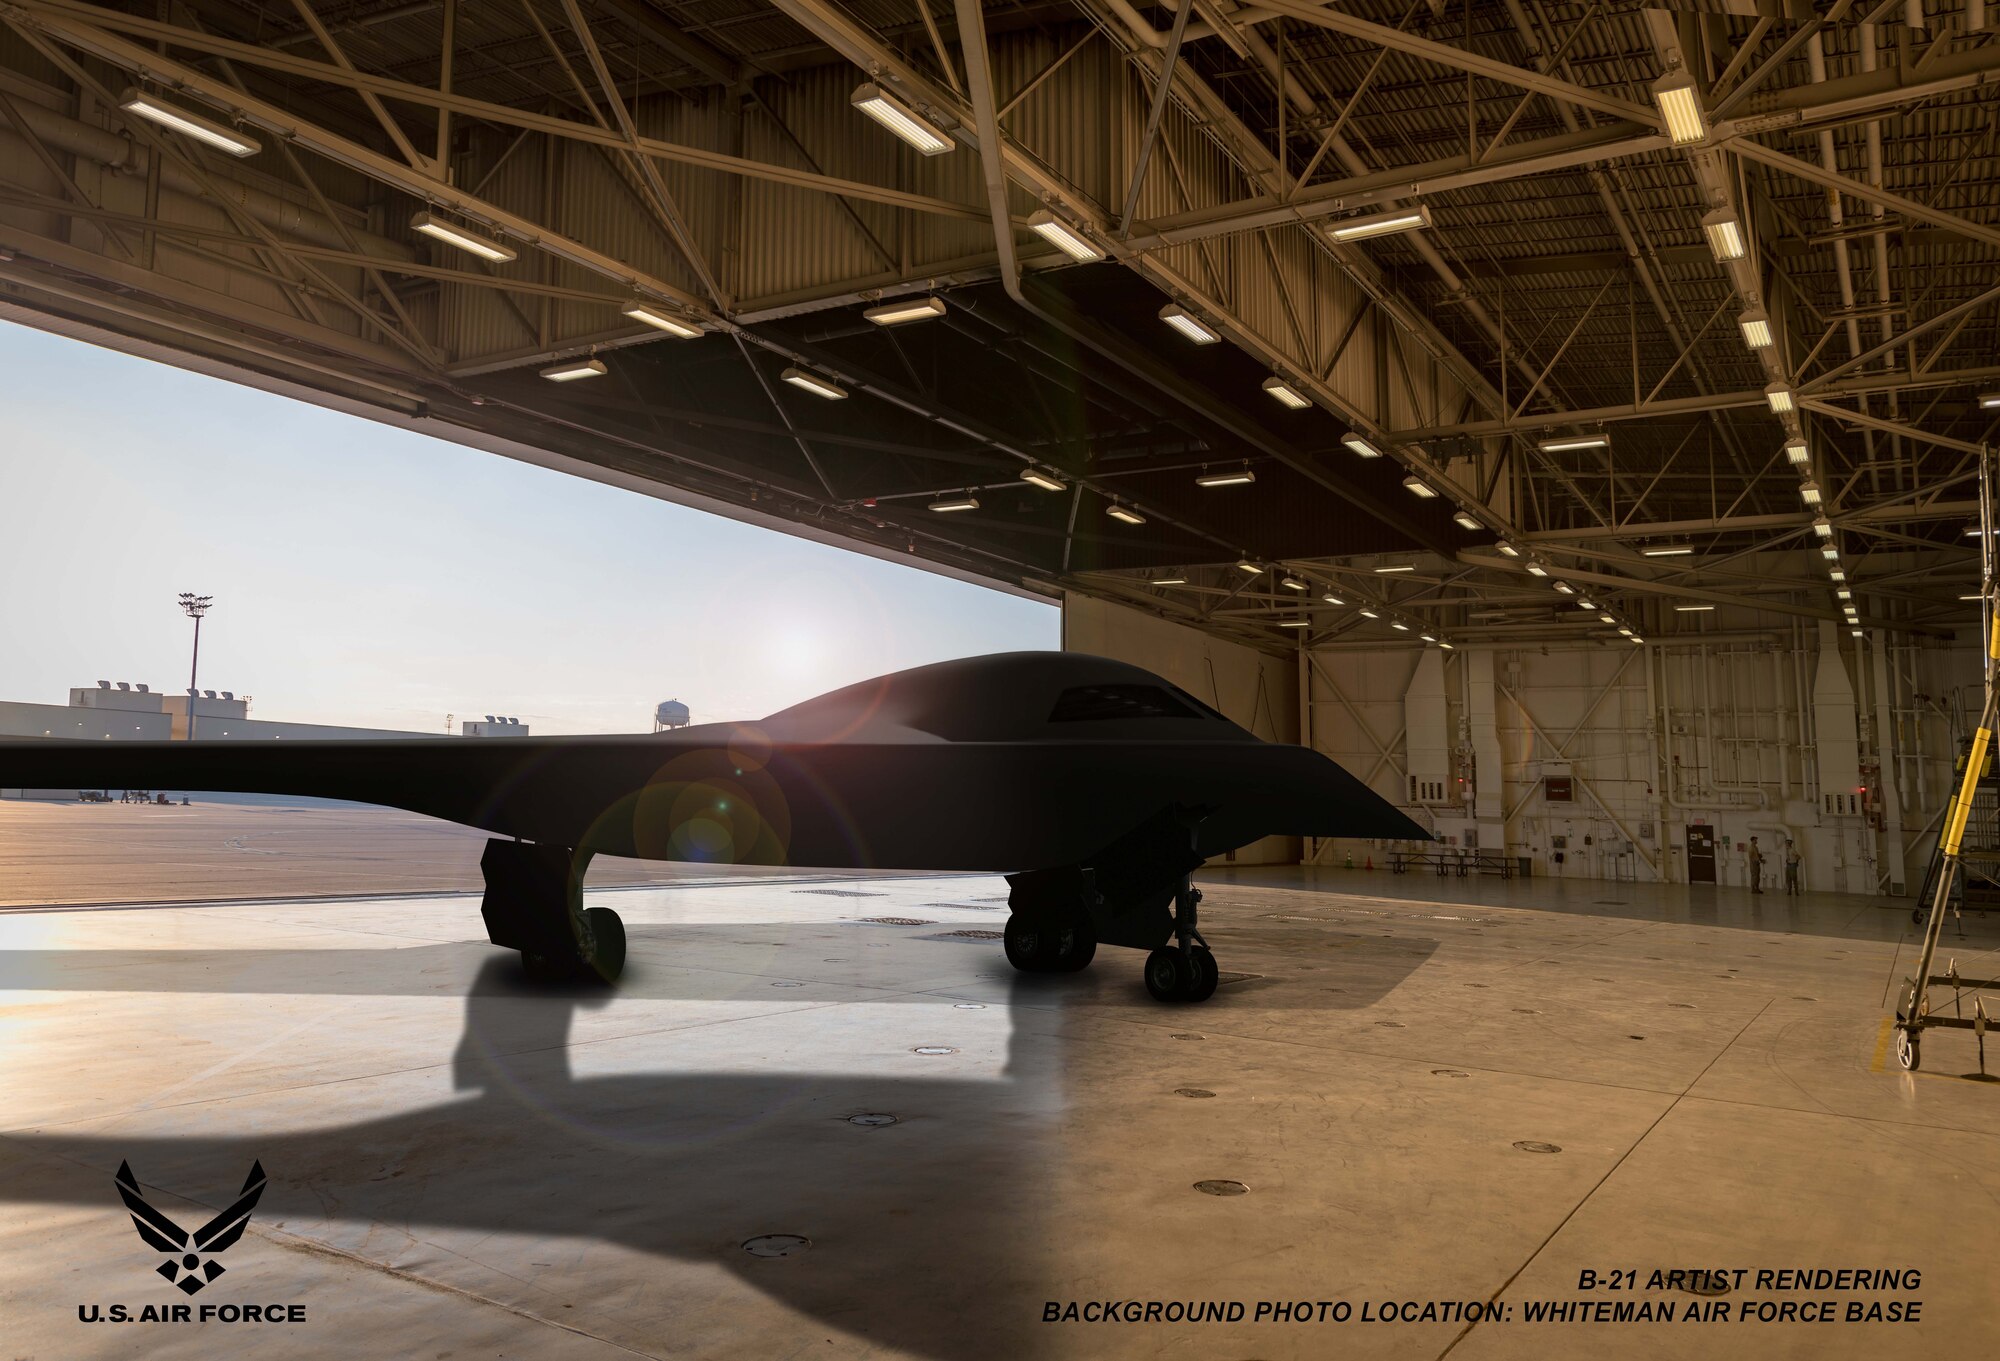 This is an artist rendering of a B-21 Raider concept in a hangar at Whiteman Air Force Base, Mo. Whiteman AFB is one of the bases expected to host the new airframe. (Courtesy graphic by Northrop Grumman)